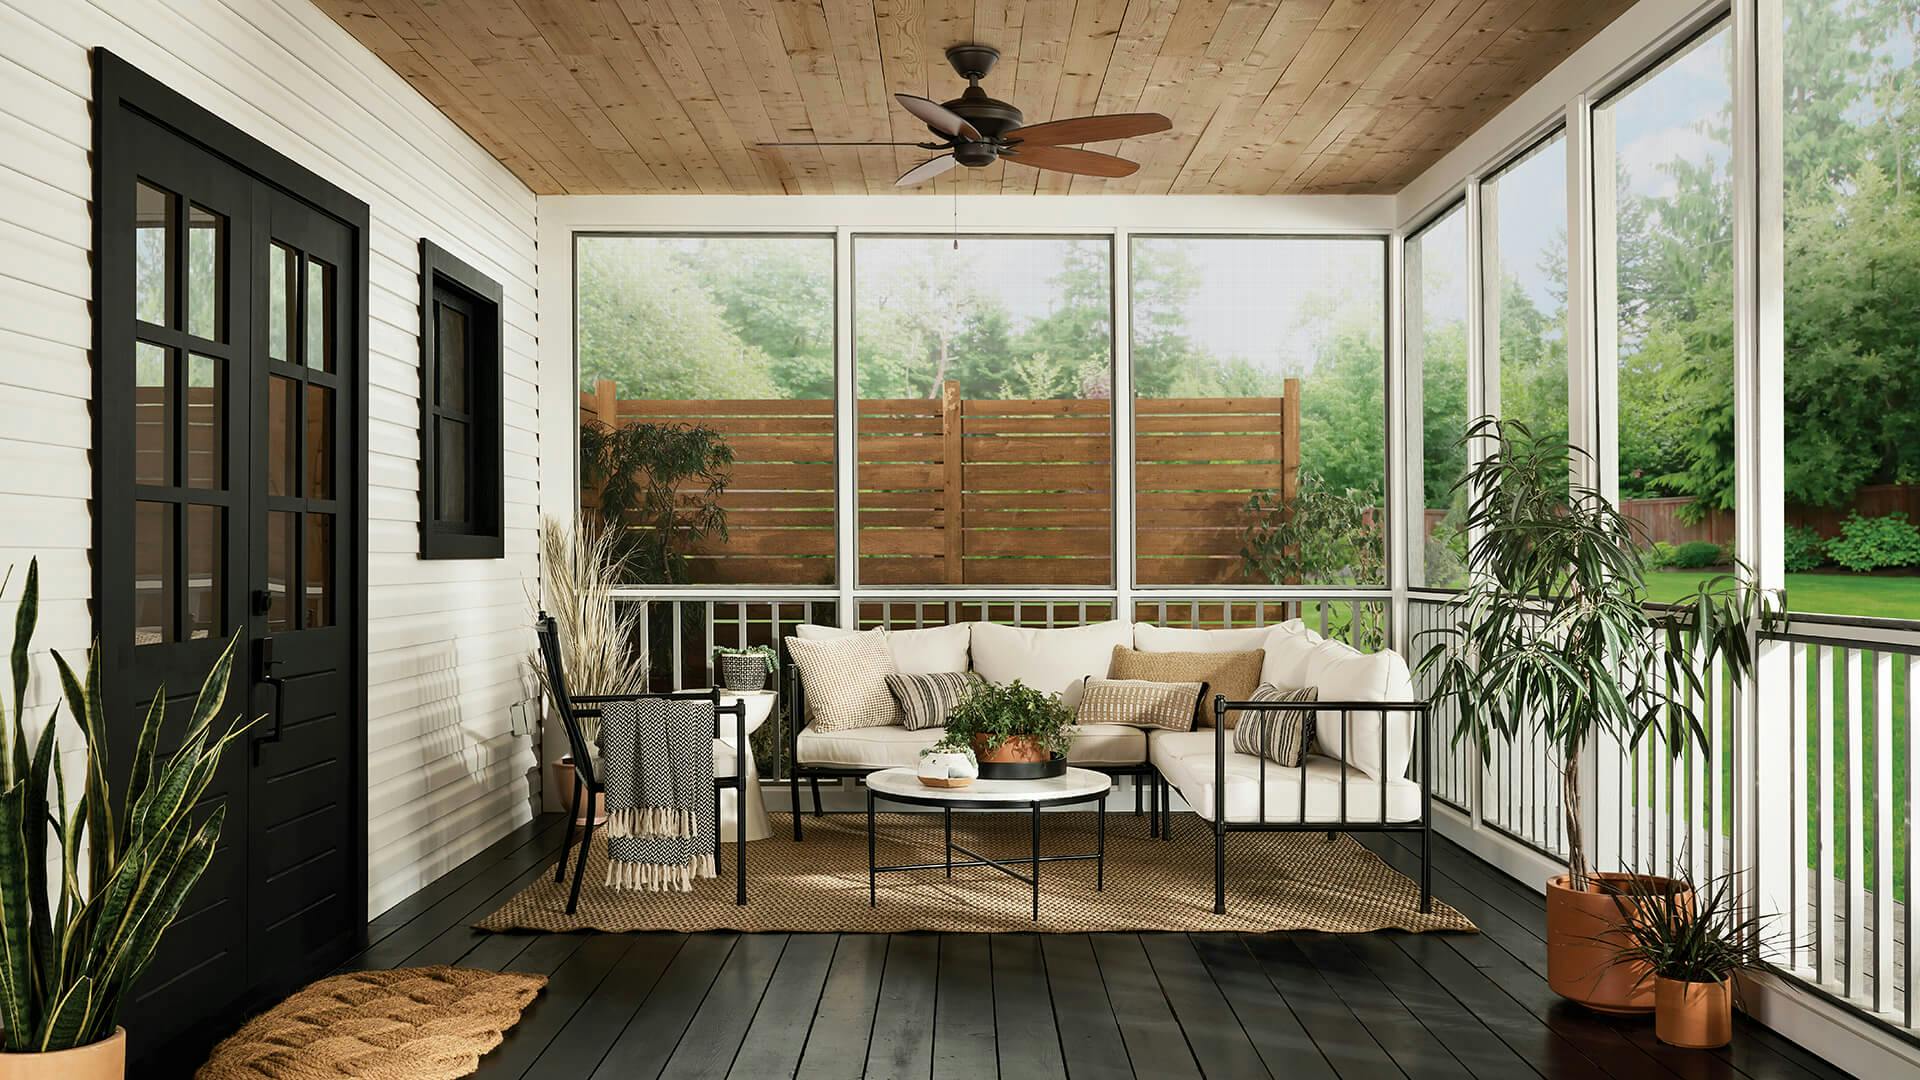 Exterior of a screened in porch with a white cushion porch and featuring a Cabot ceiling fan